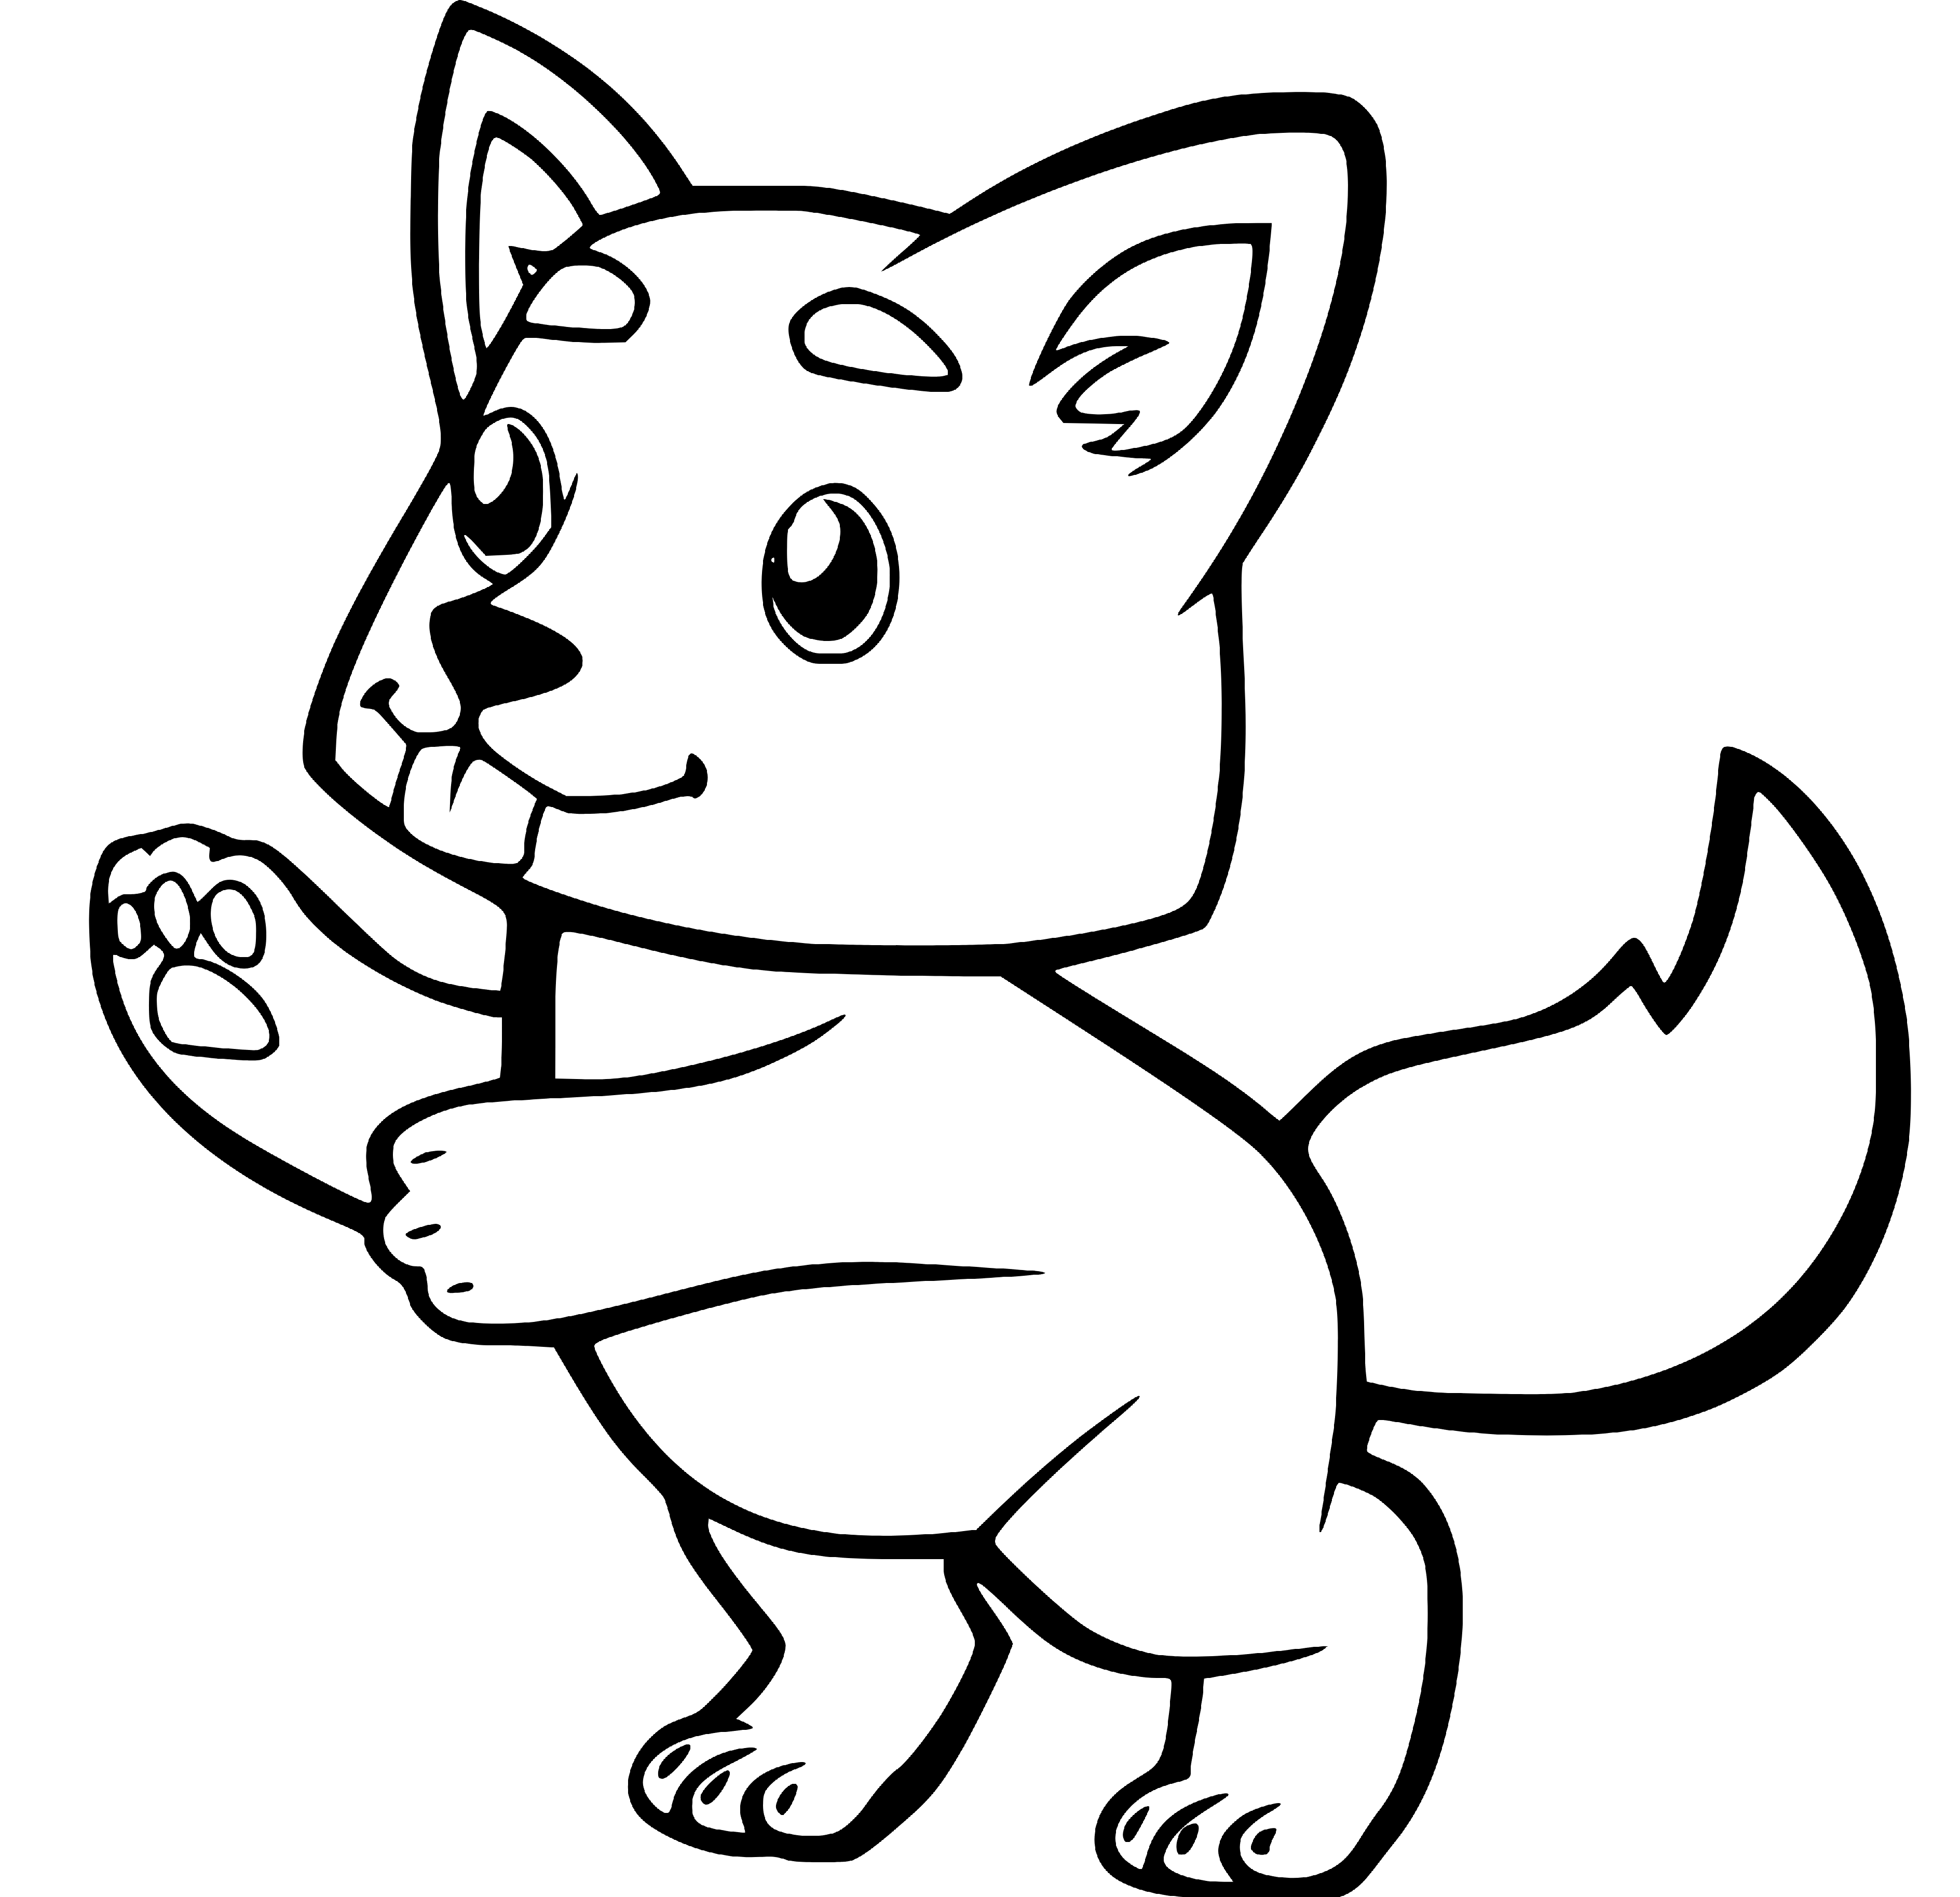 Baby Wolf Coloring Page for Children Printable - SheetalColor.com